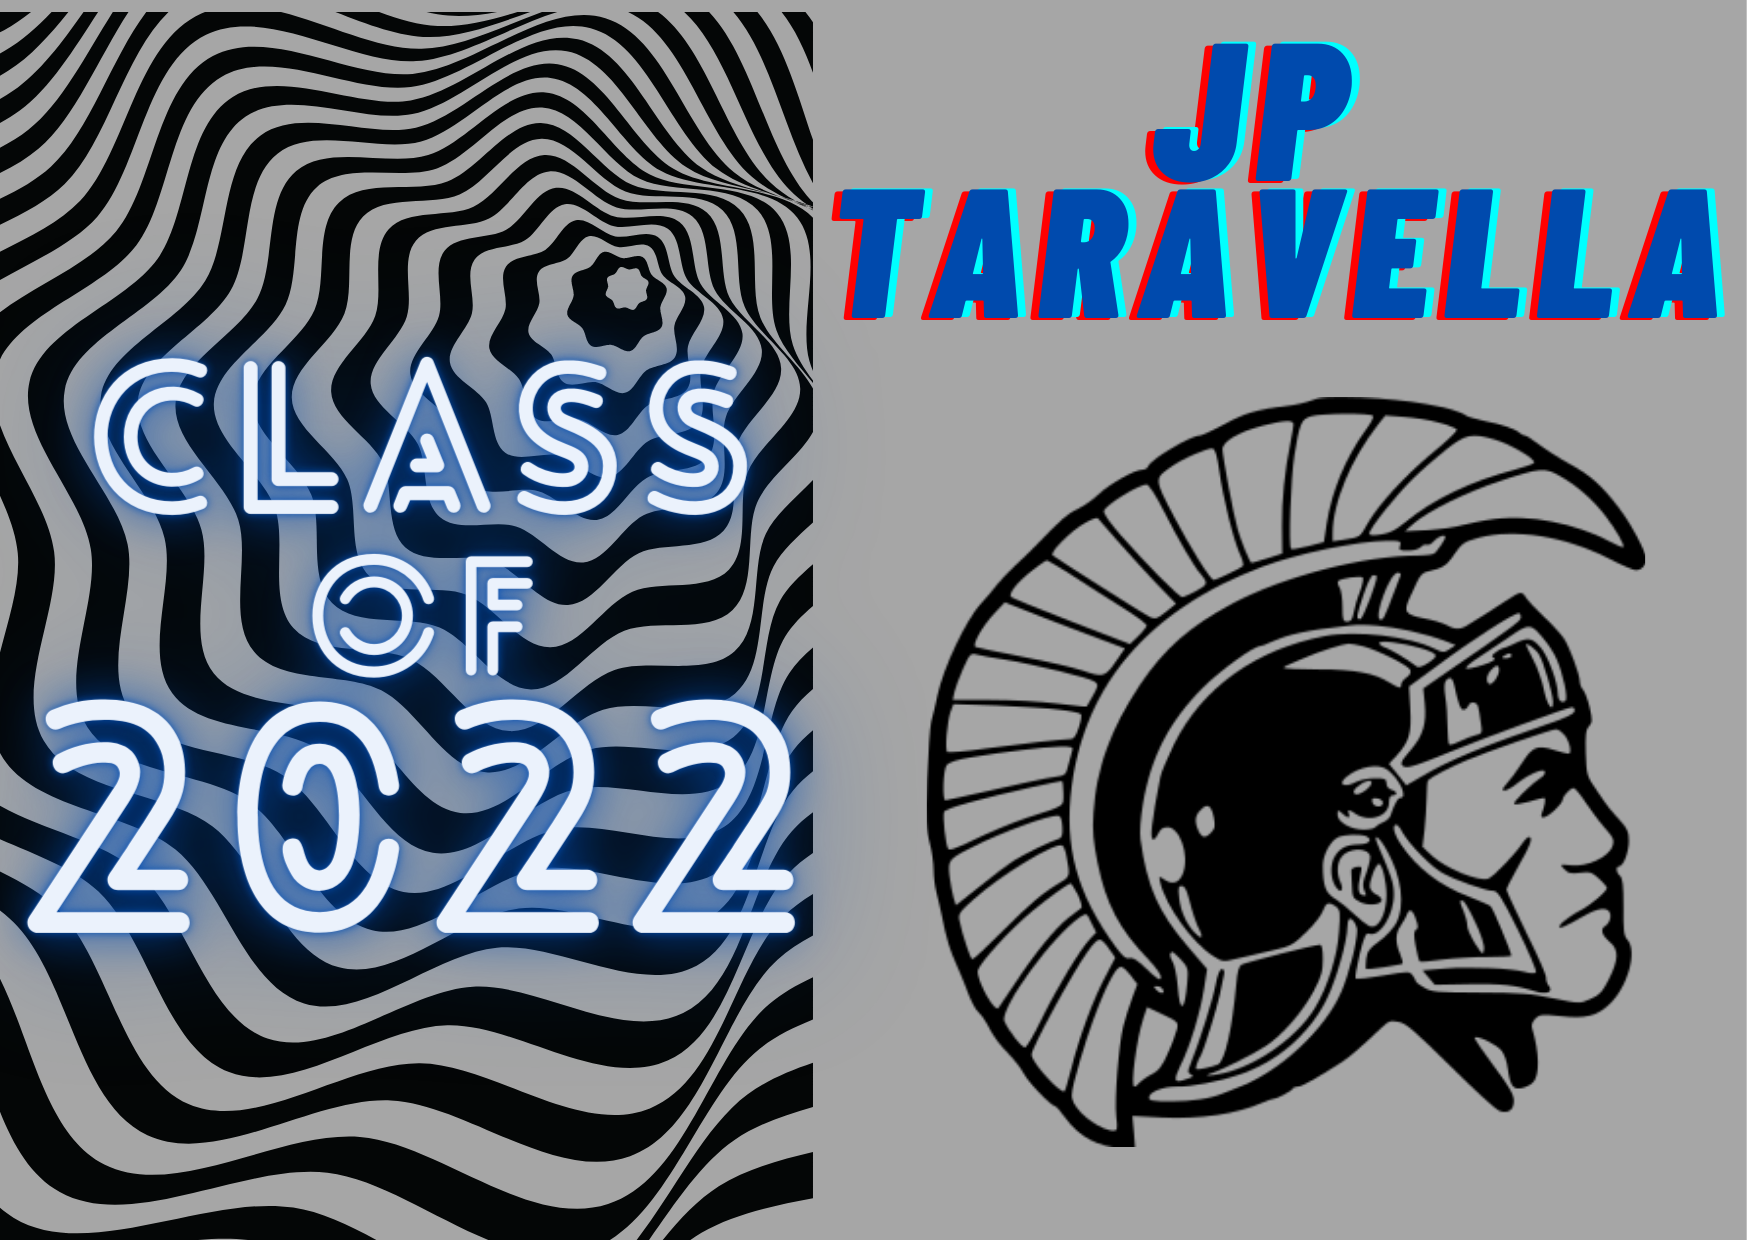 Class of 2022.png